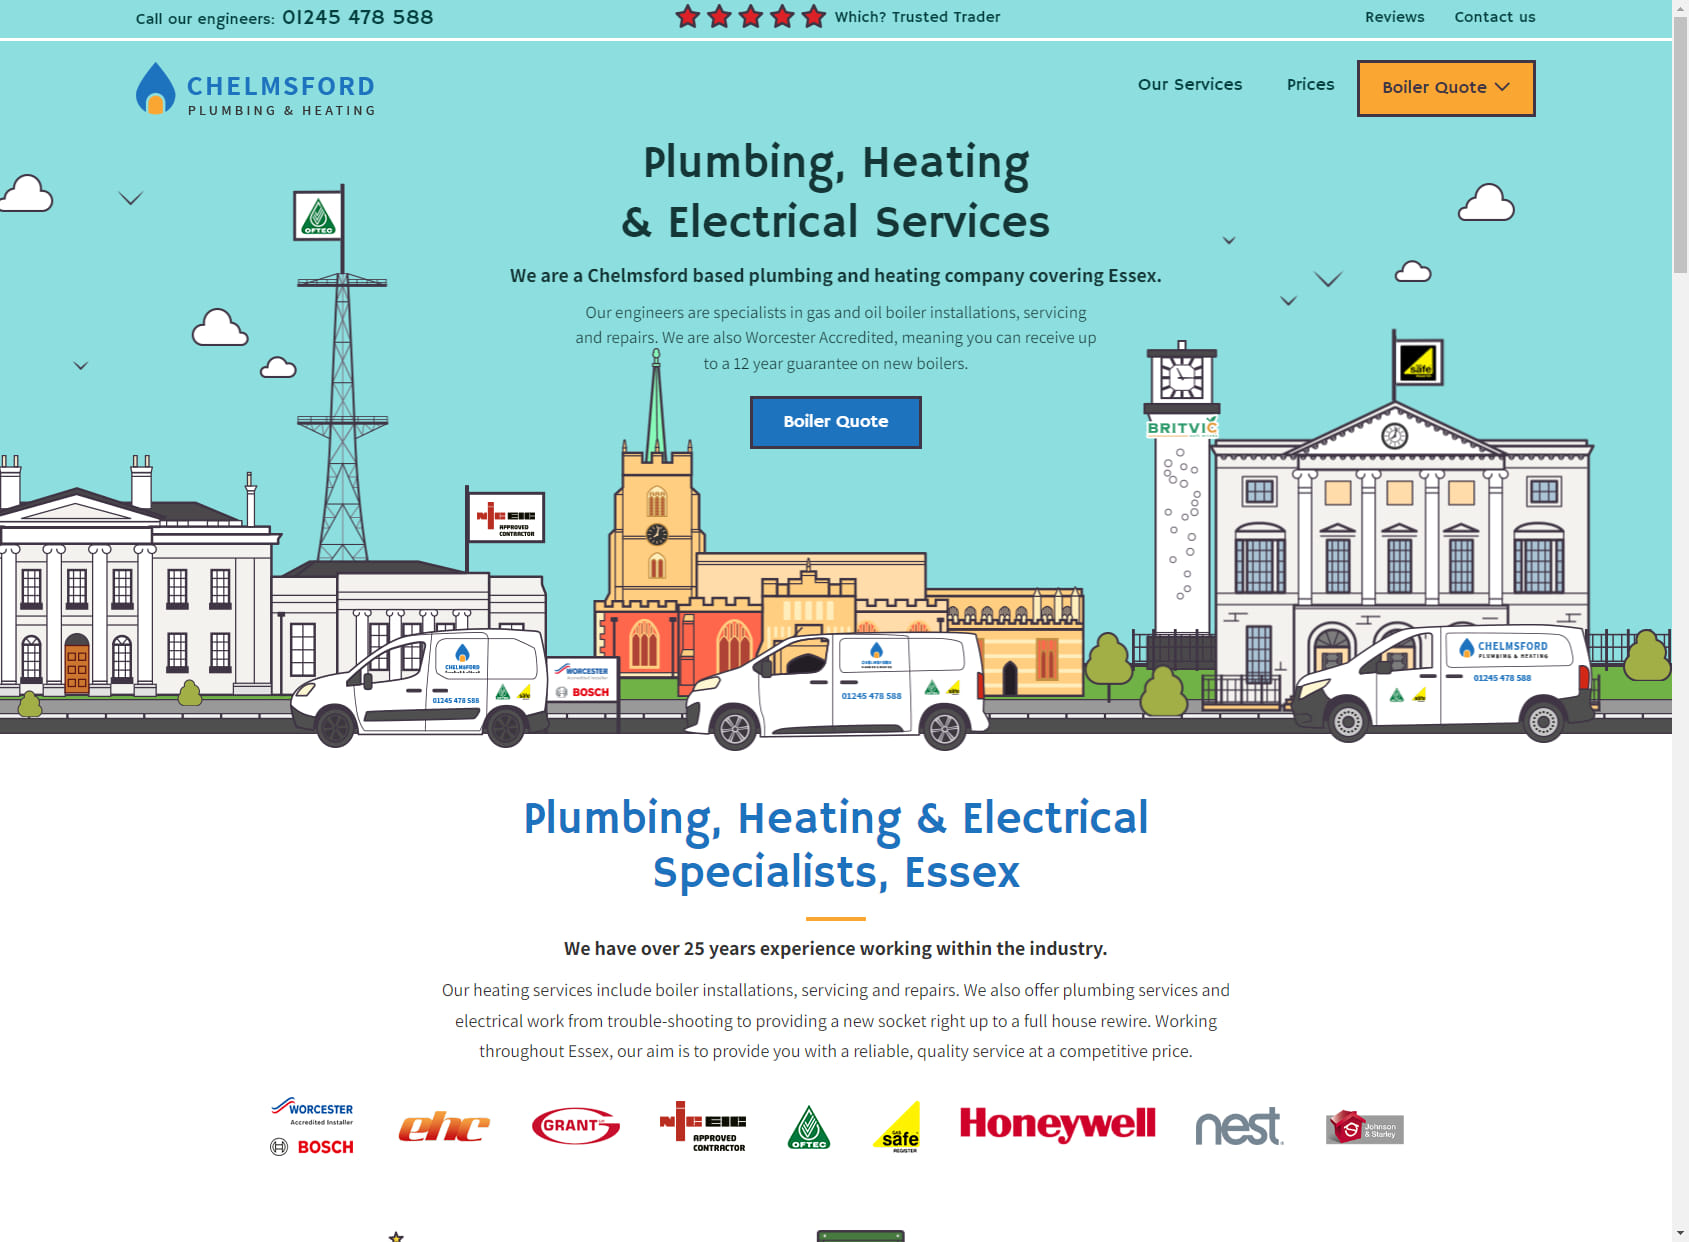 Chelmsford Plumbing and Heating